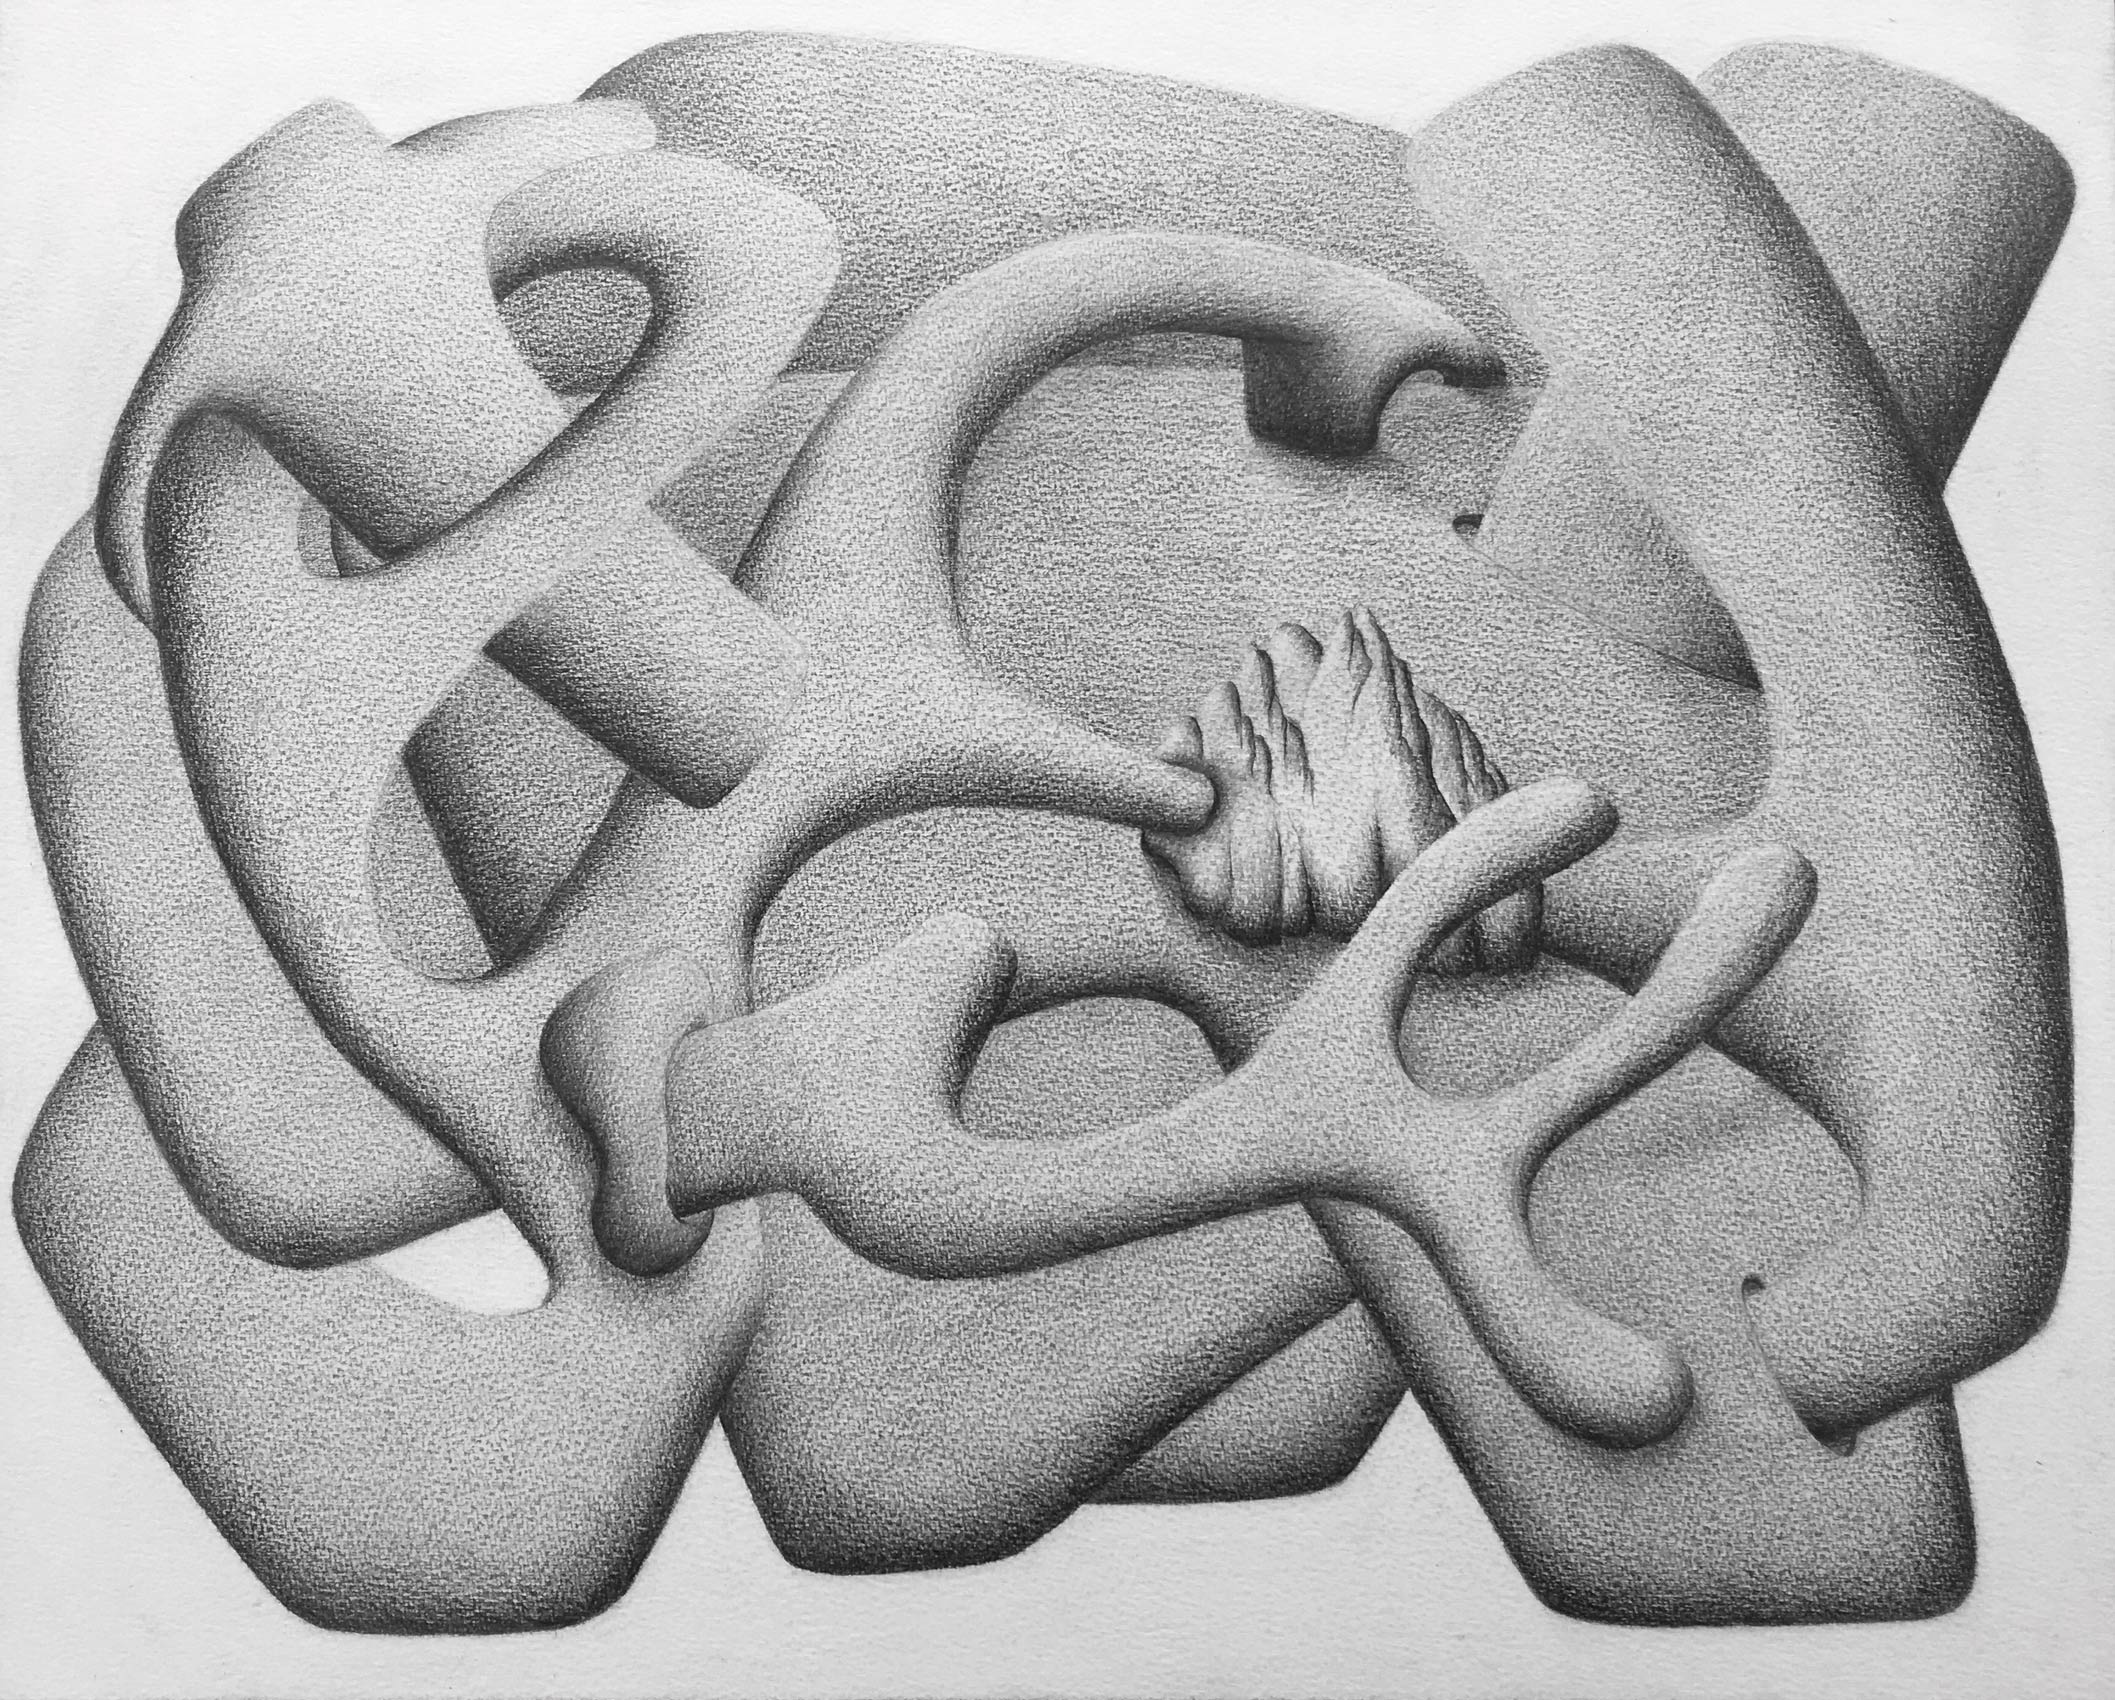 [No Title], N°DF10, Pencil on paper, 40 x  50cm, 2019 ©Pascal Demeester